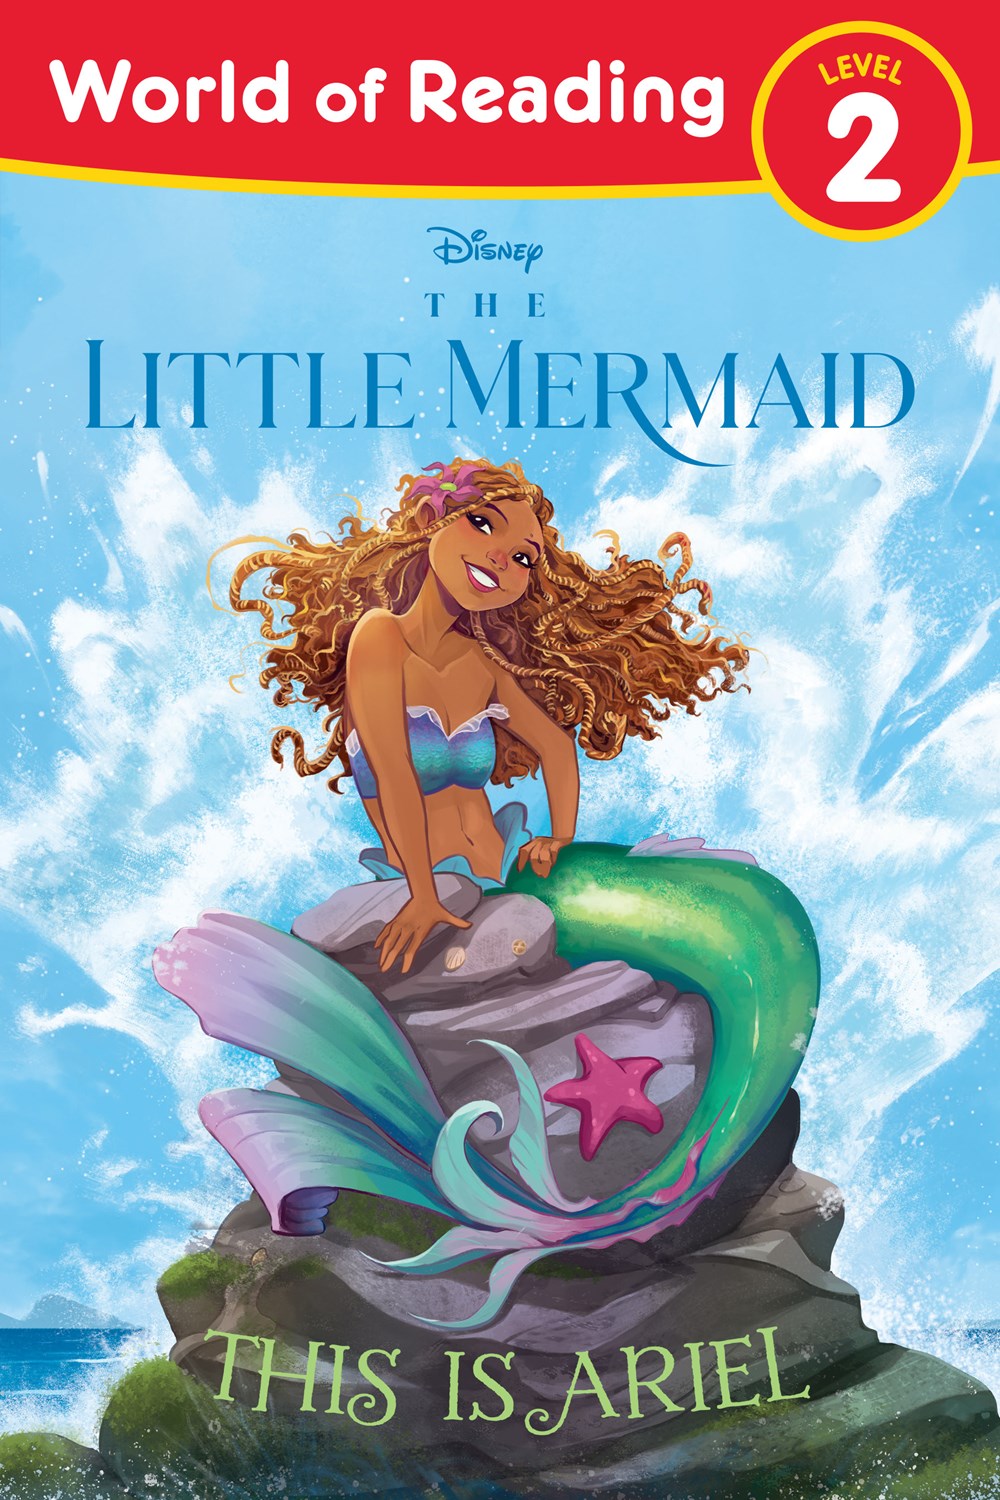 The Little Mermaid Live Action movie books